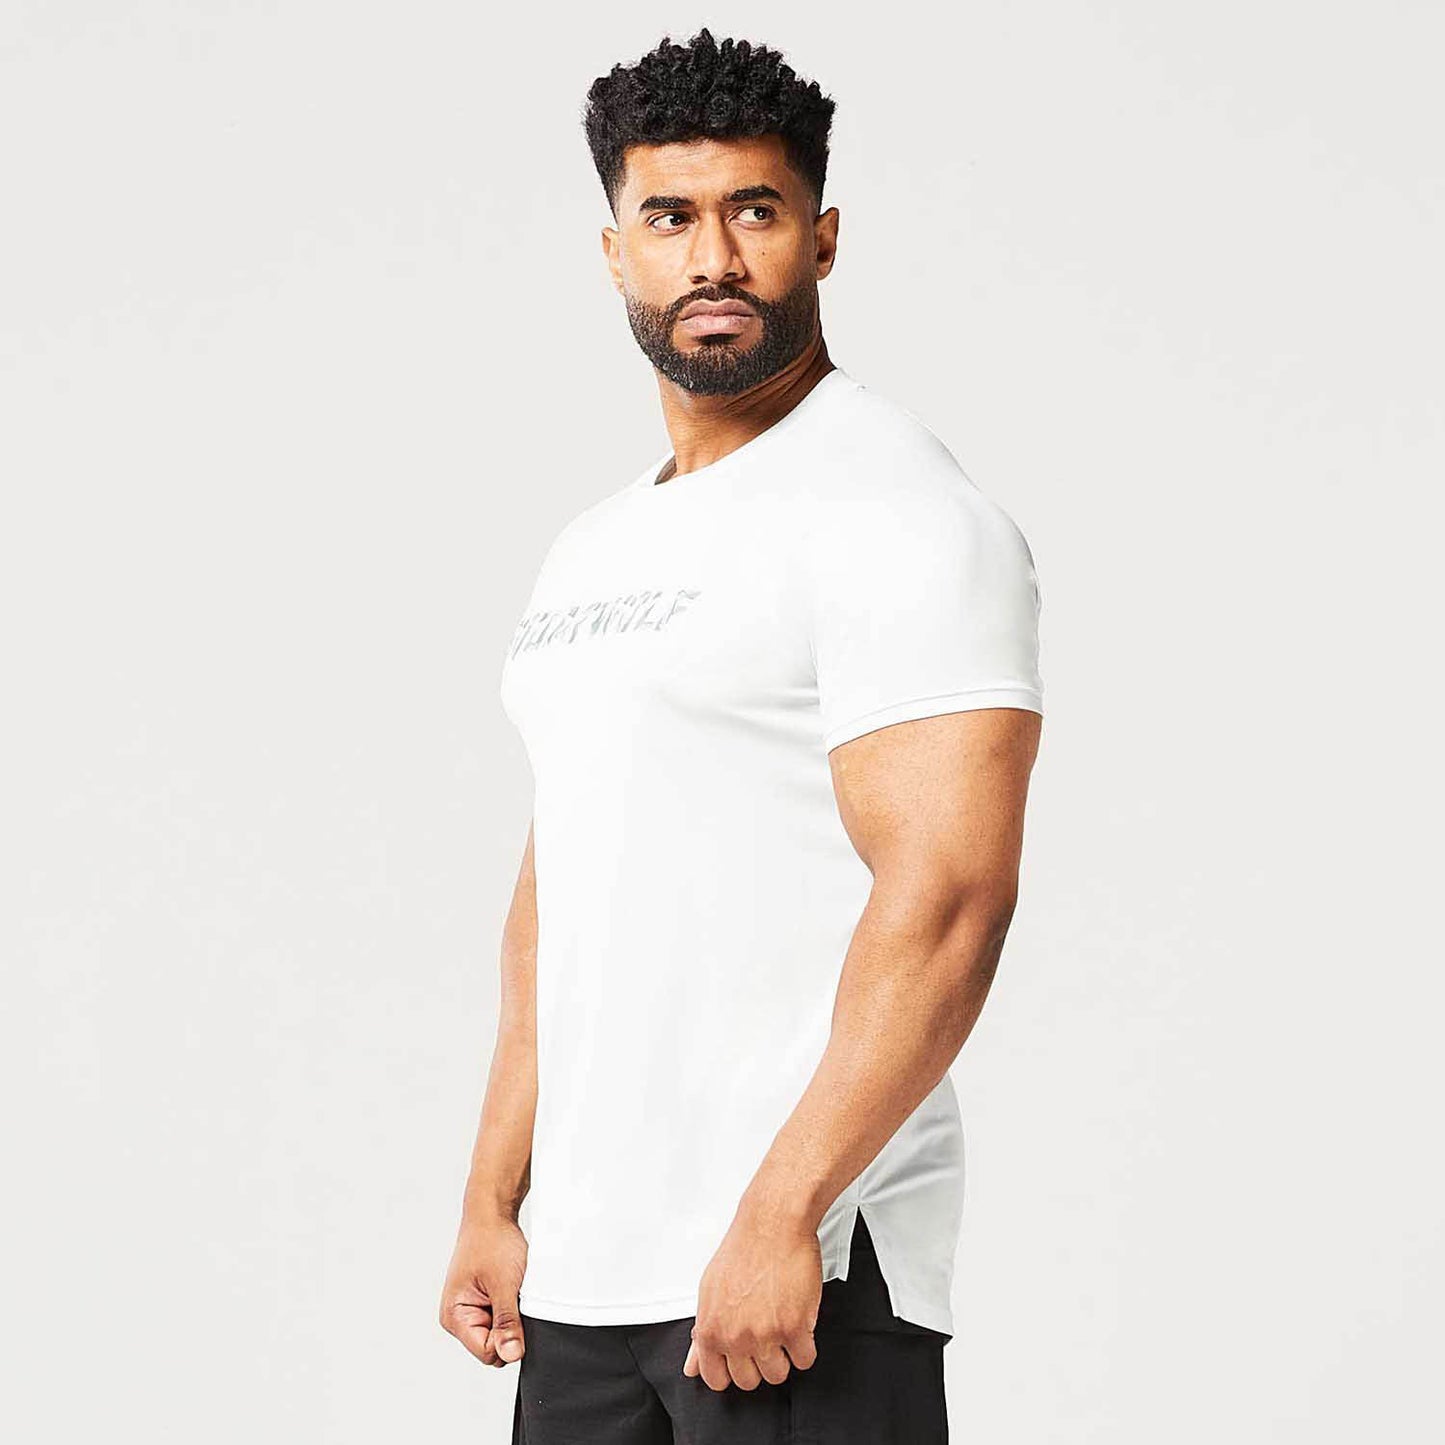 squatwolf-gym-wear-code-muscle-tee-grey-workout-shirts-for-men